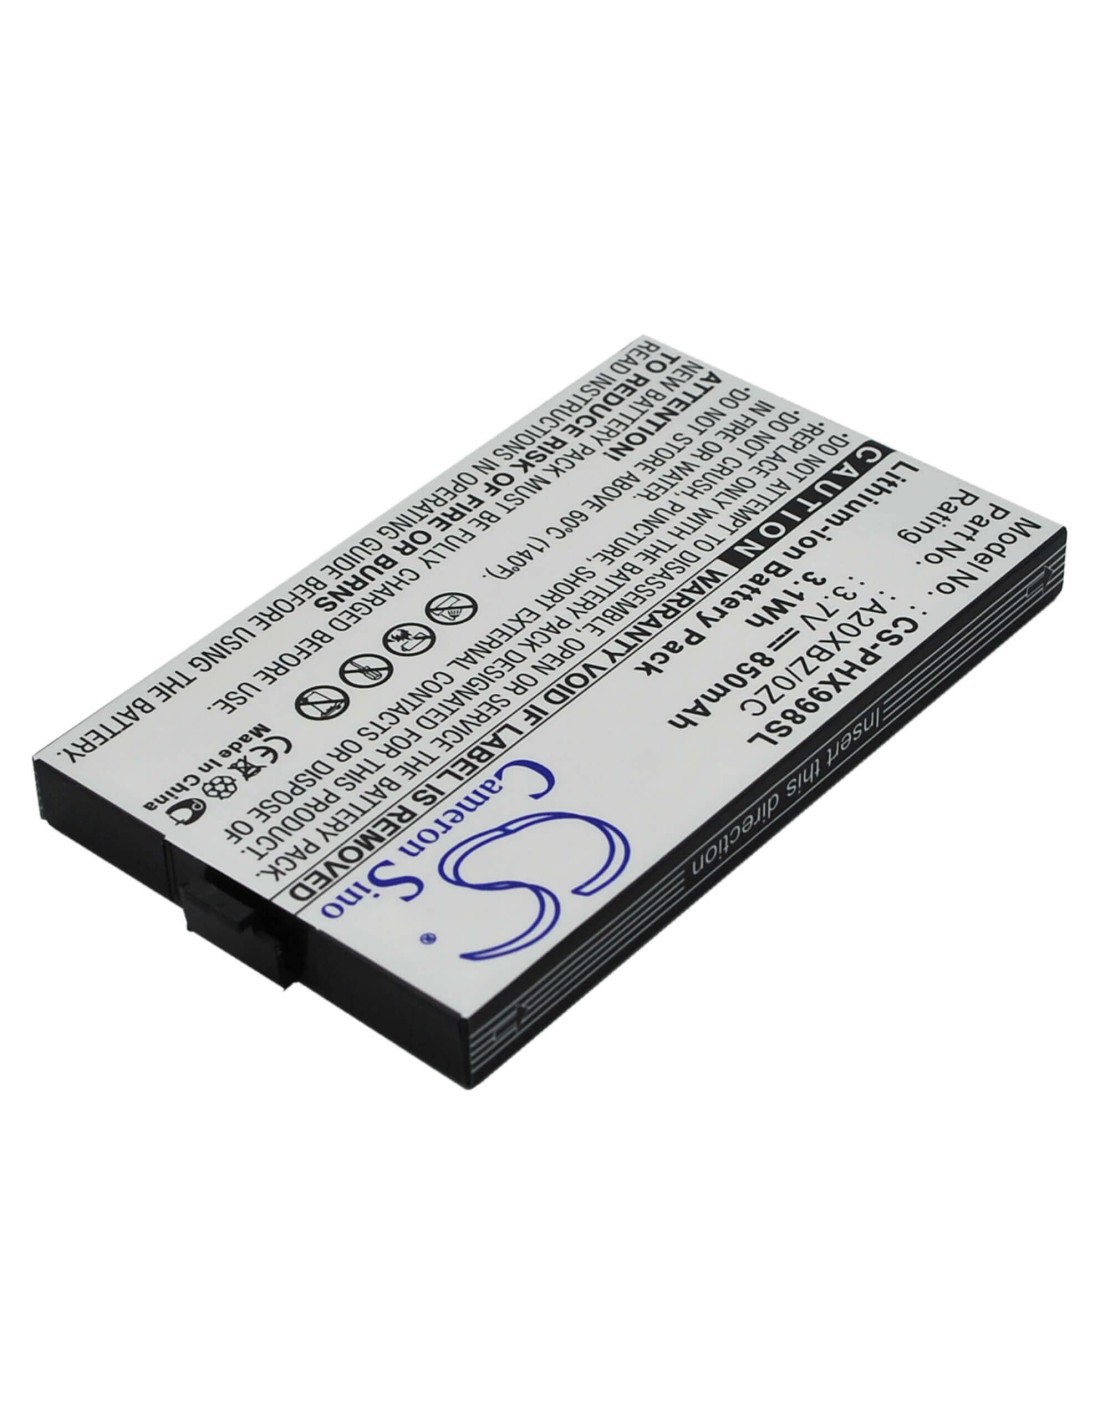 Battery for Philips Xenium 9a98, Xenium 9@98 3.7V, 850mAh - 3.15Wh